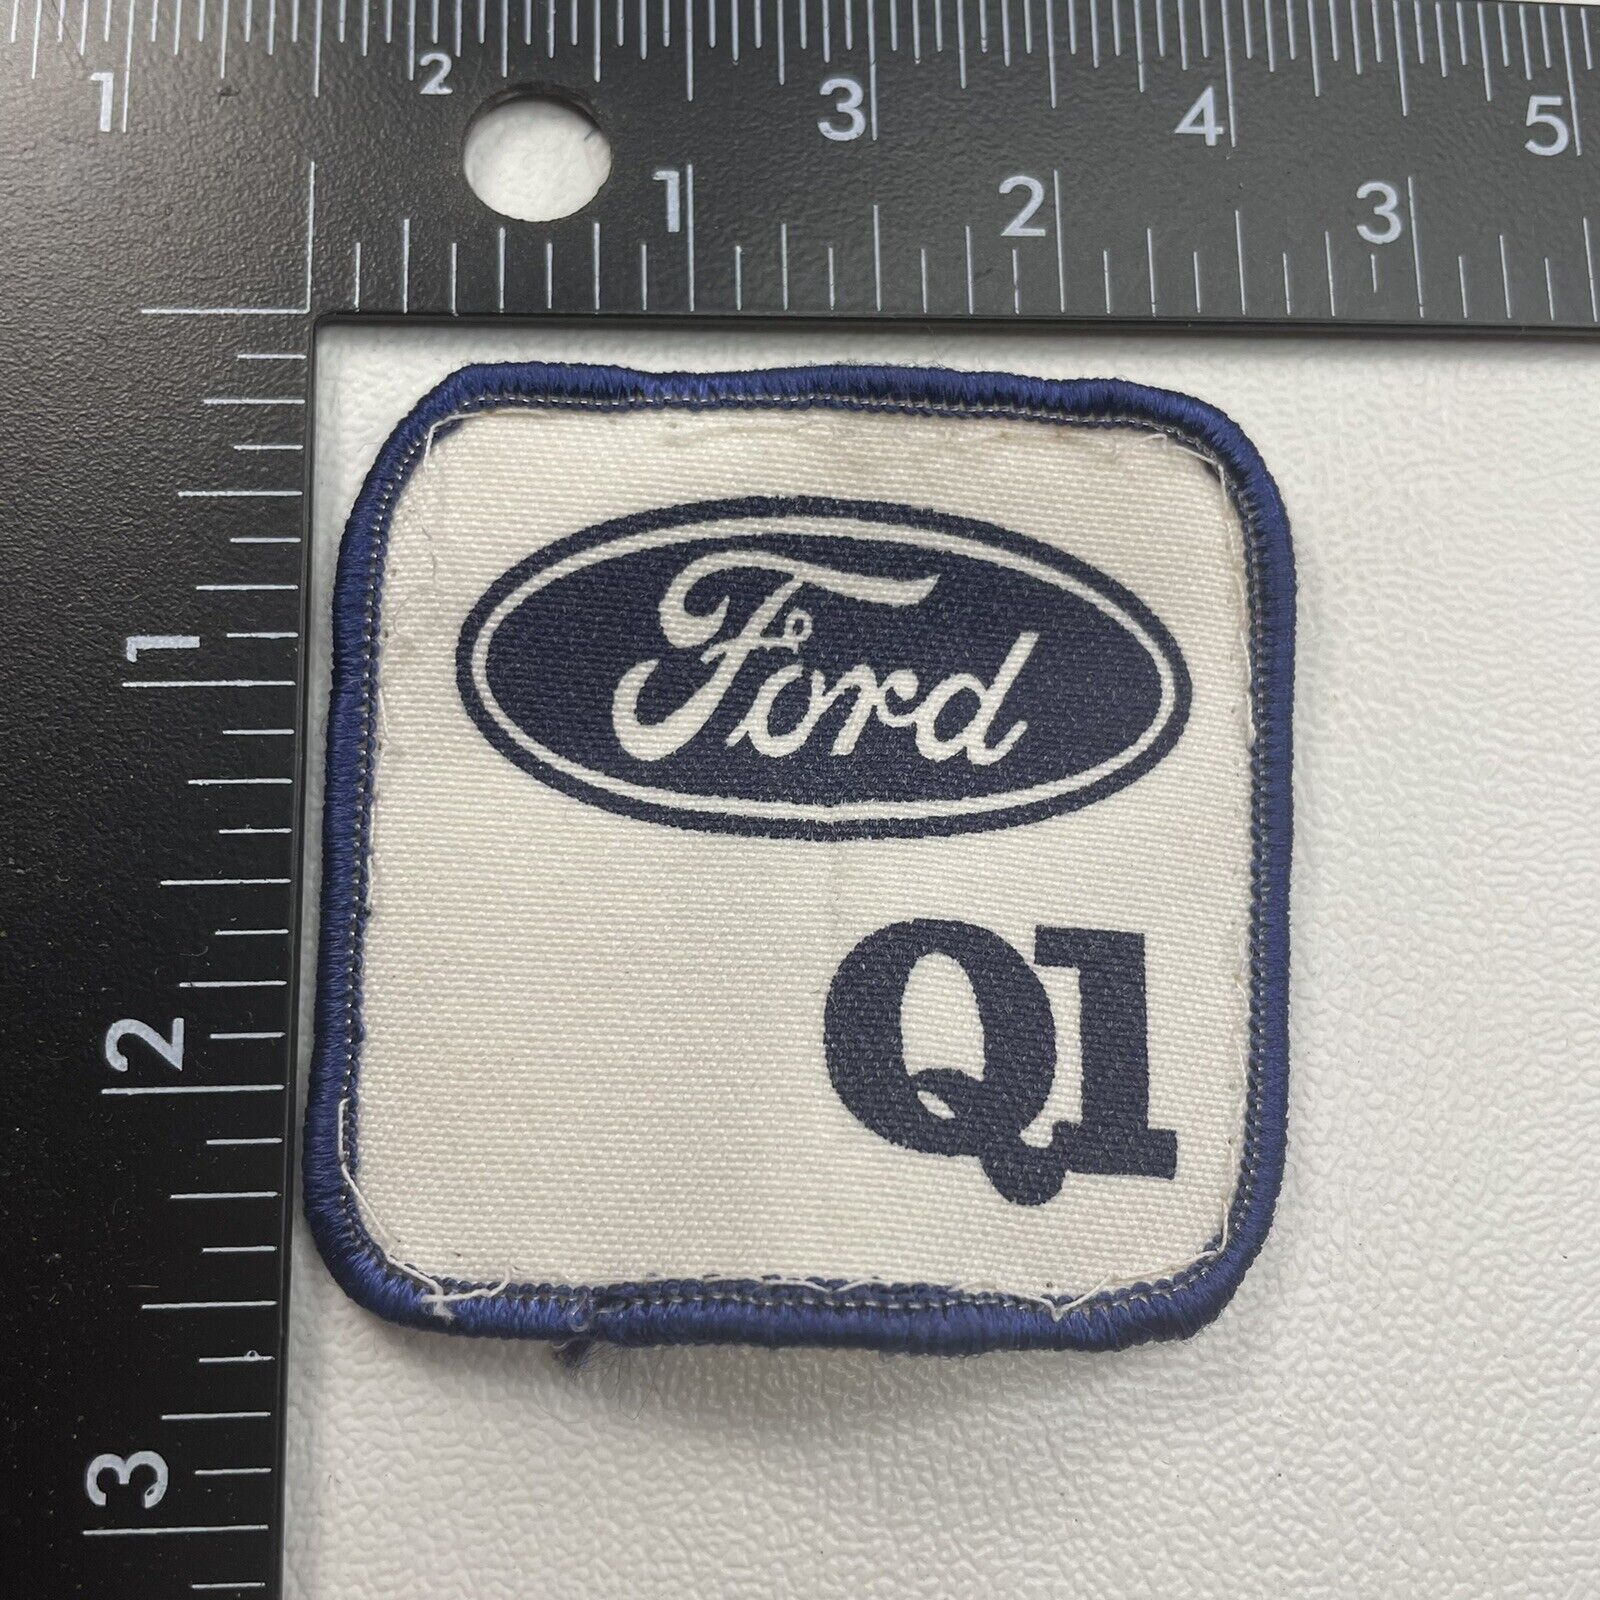 Vtg 1980s Kinda-curled FORD Q1 (Quality If Job One) Patch (Car Auto Related)22PD